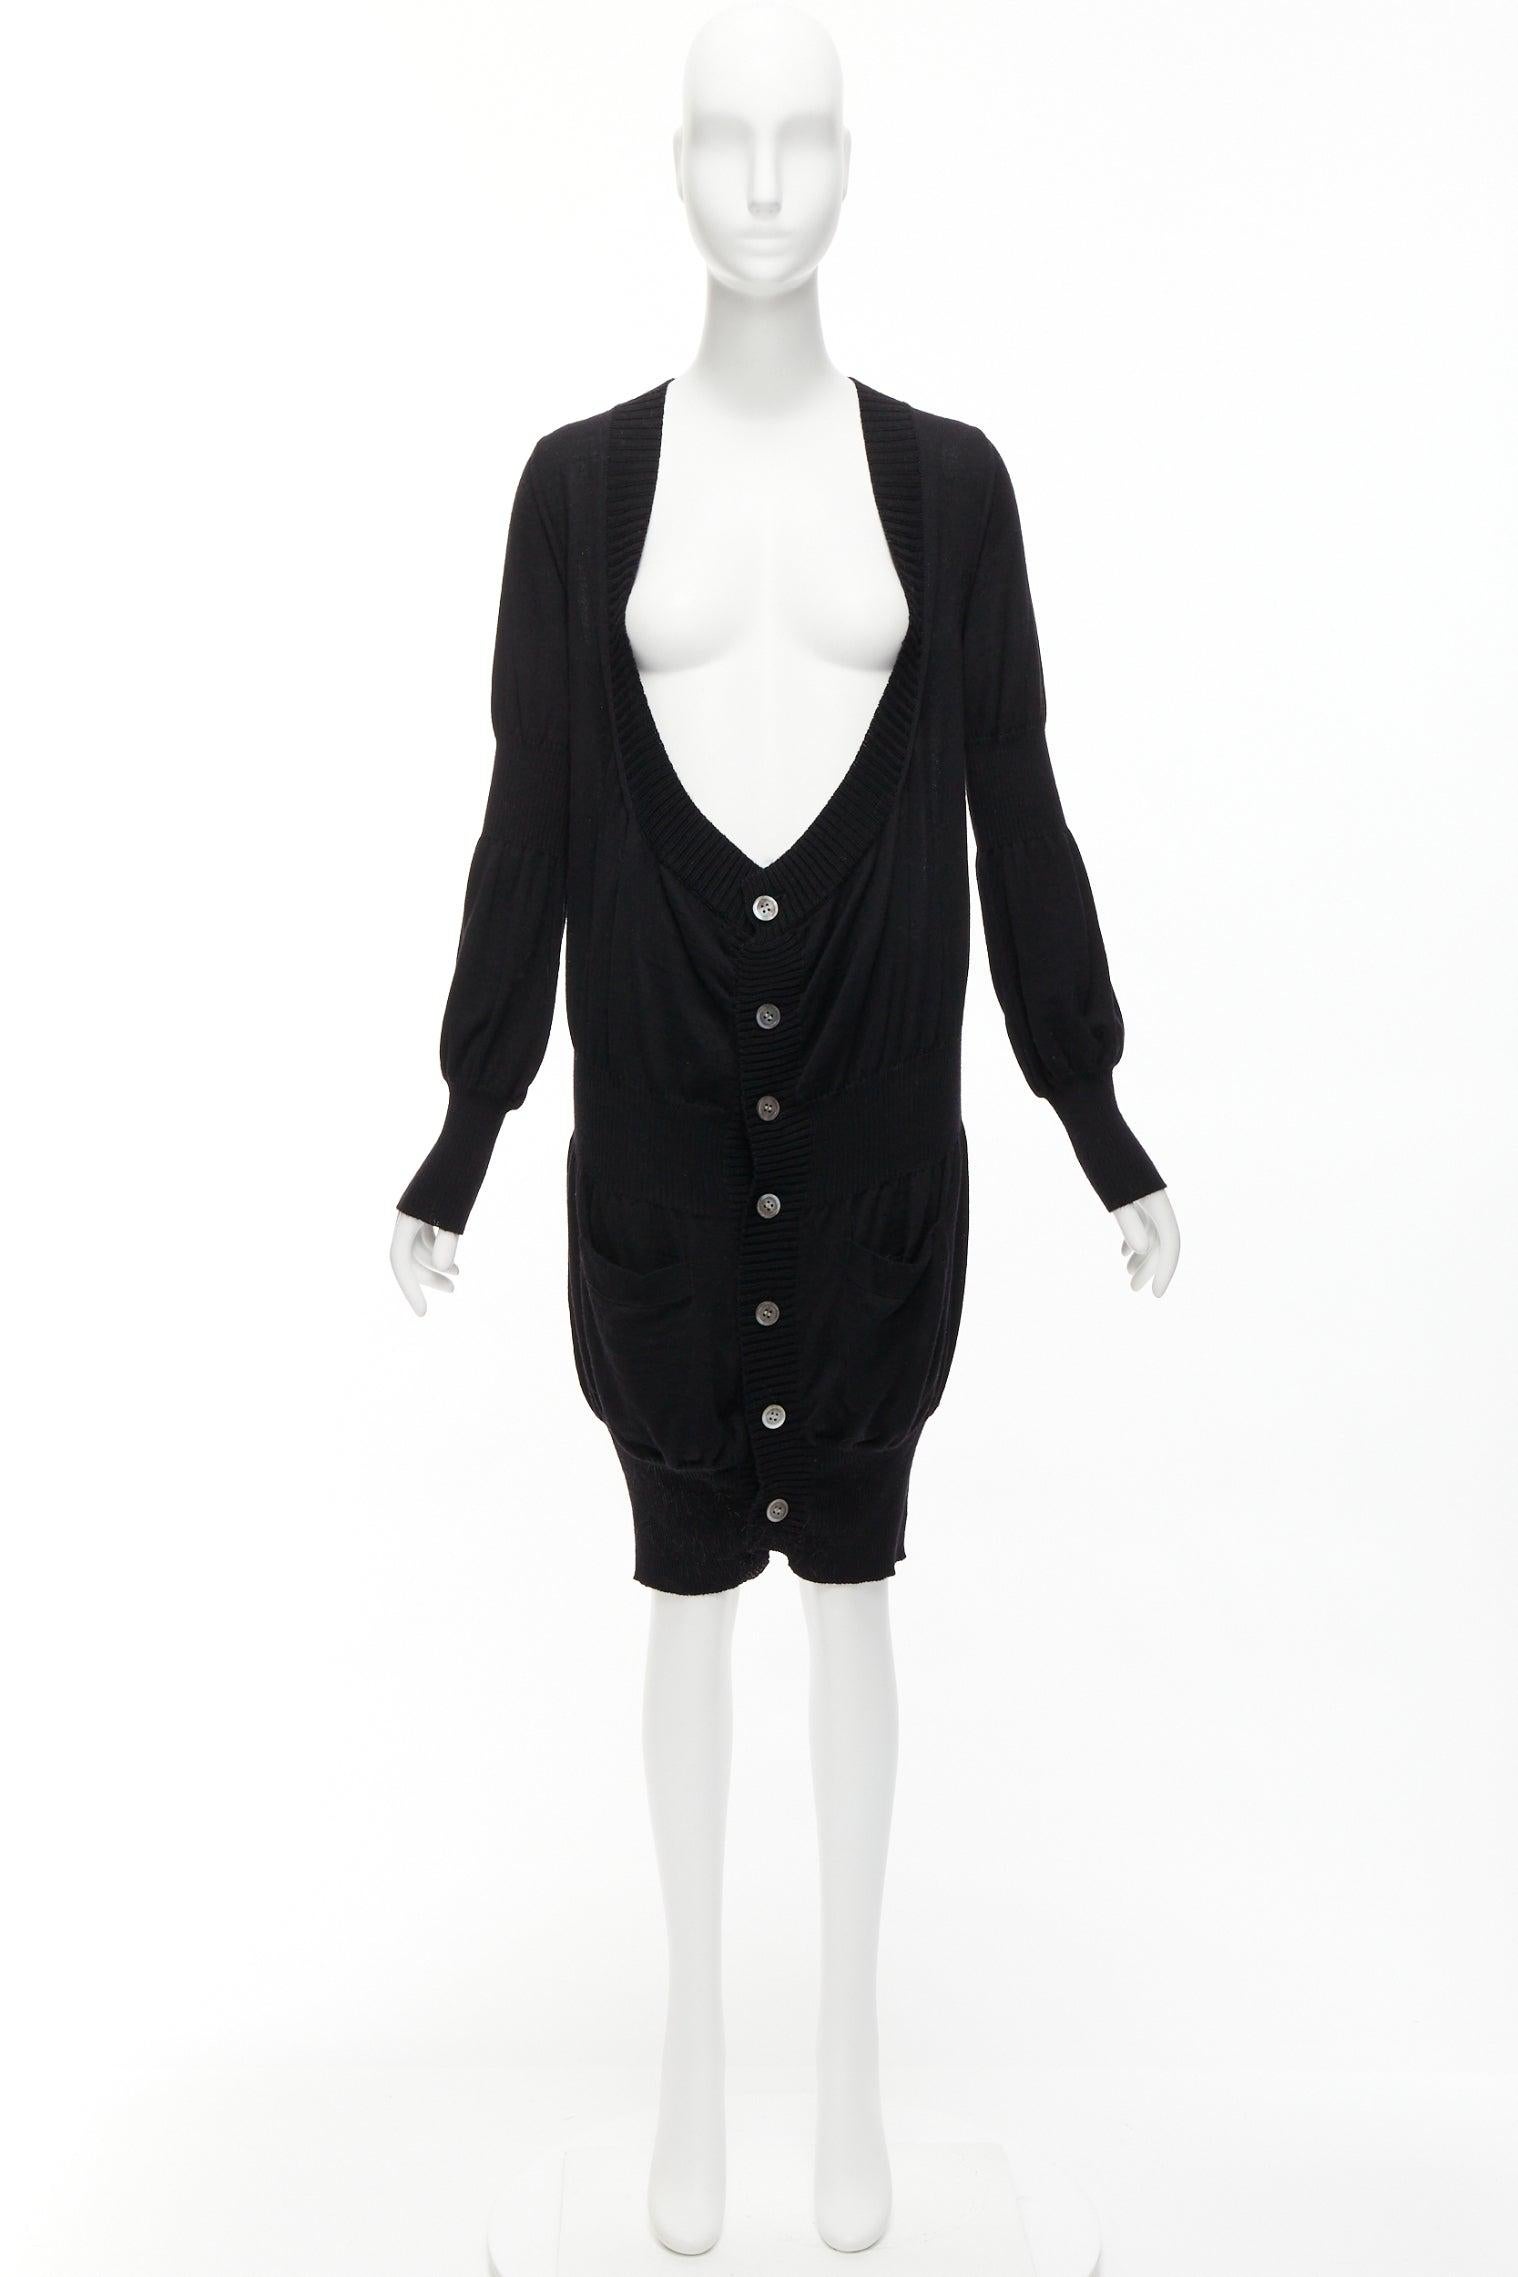 JUNYA WATANABE 2006 black wool low cut long button up cardigan sweater S For Sale 5